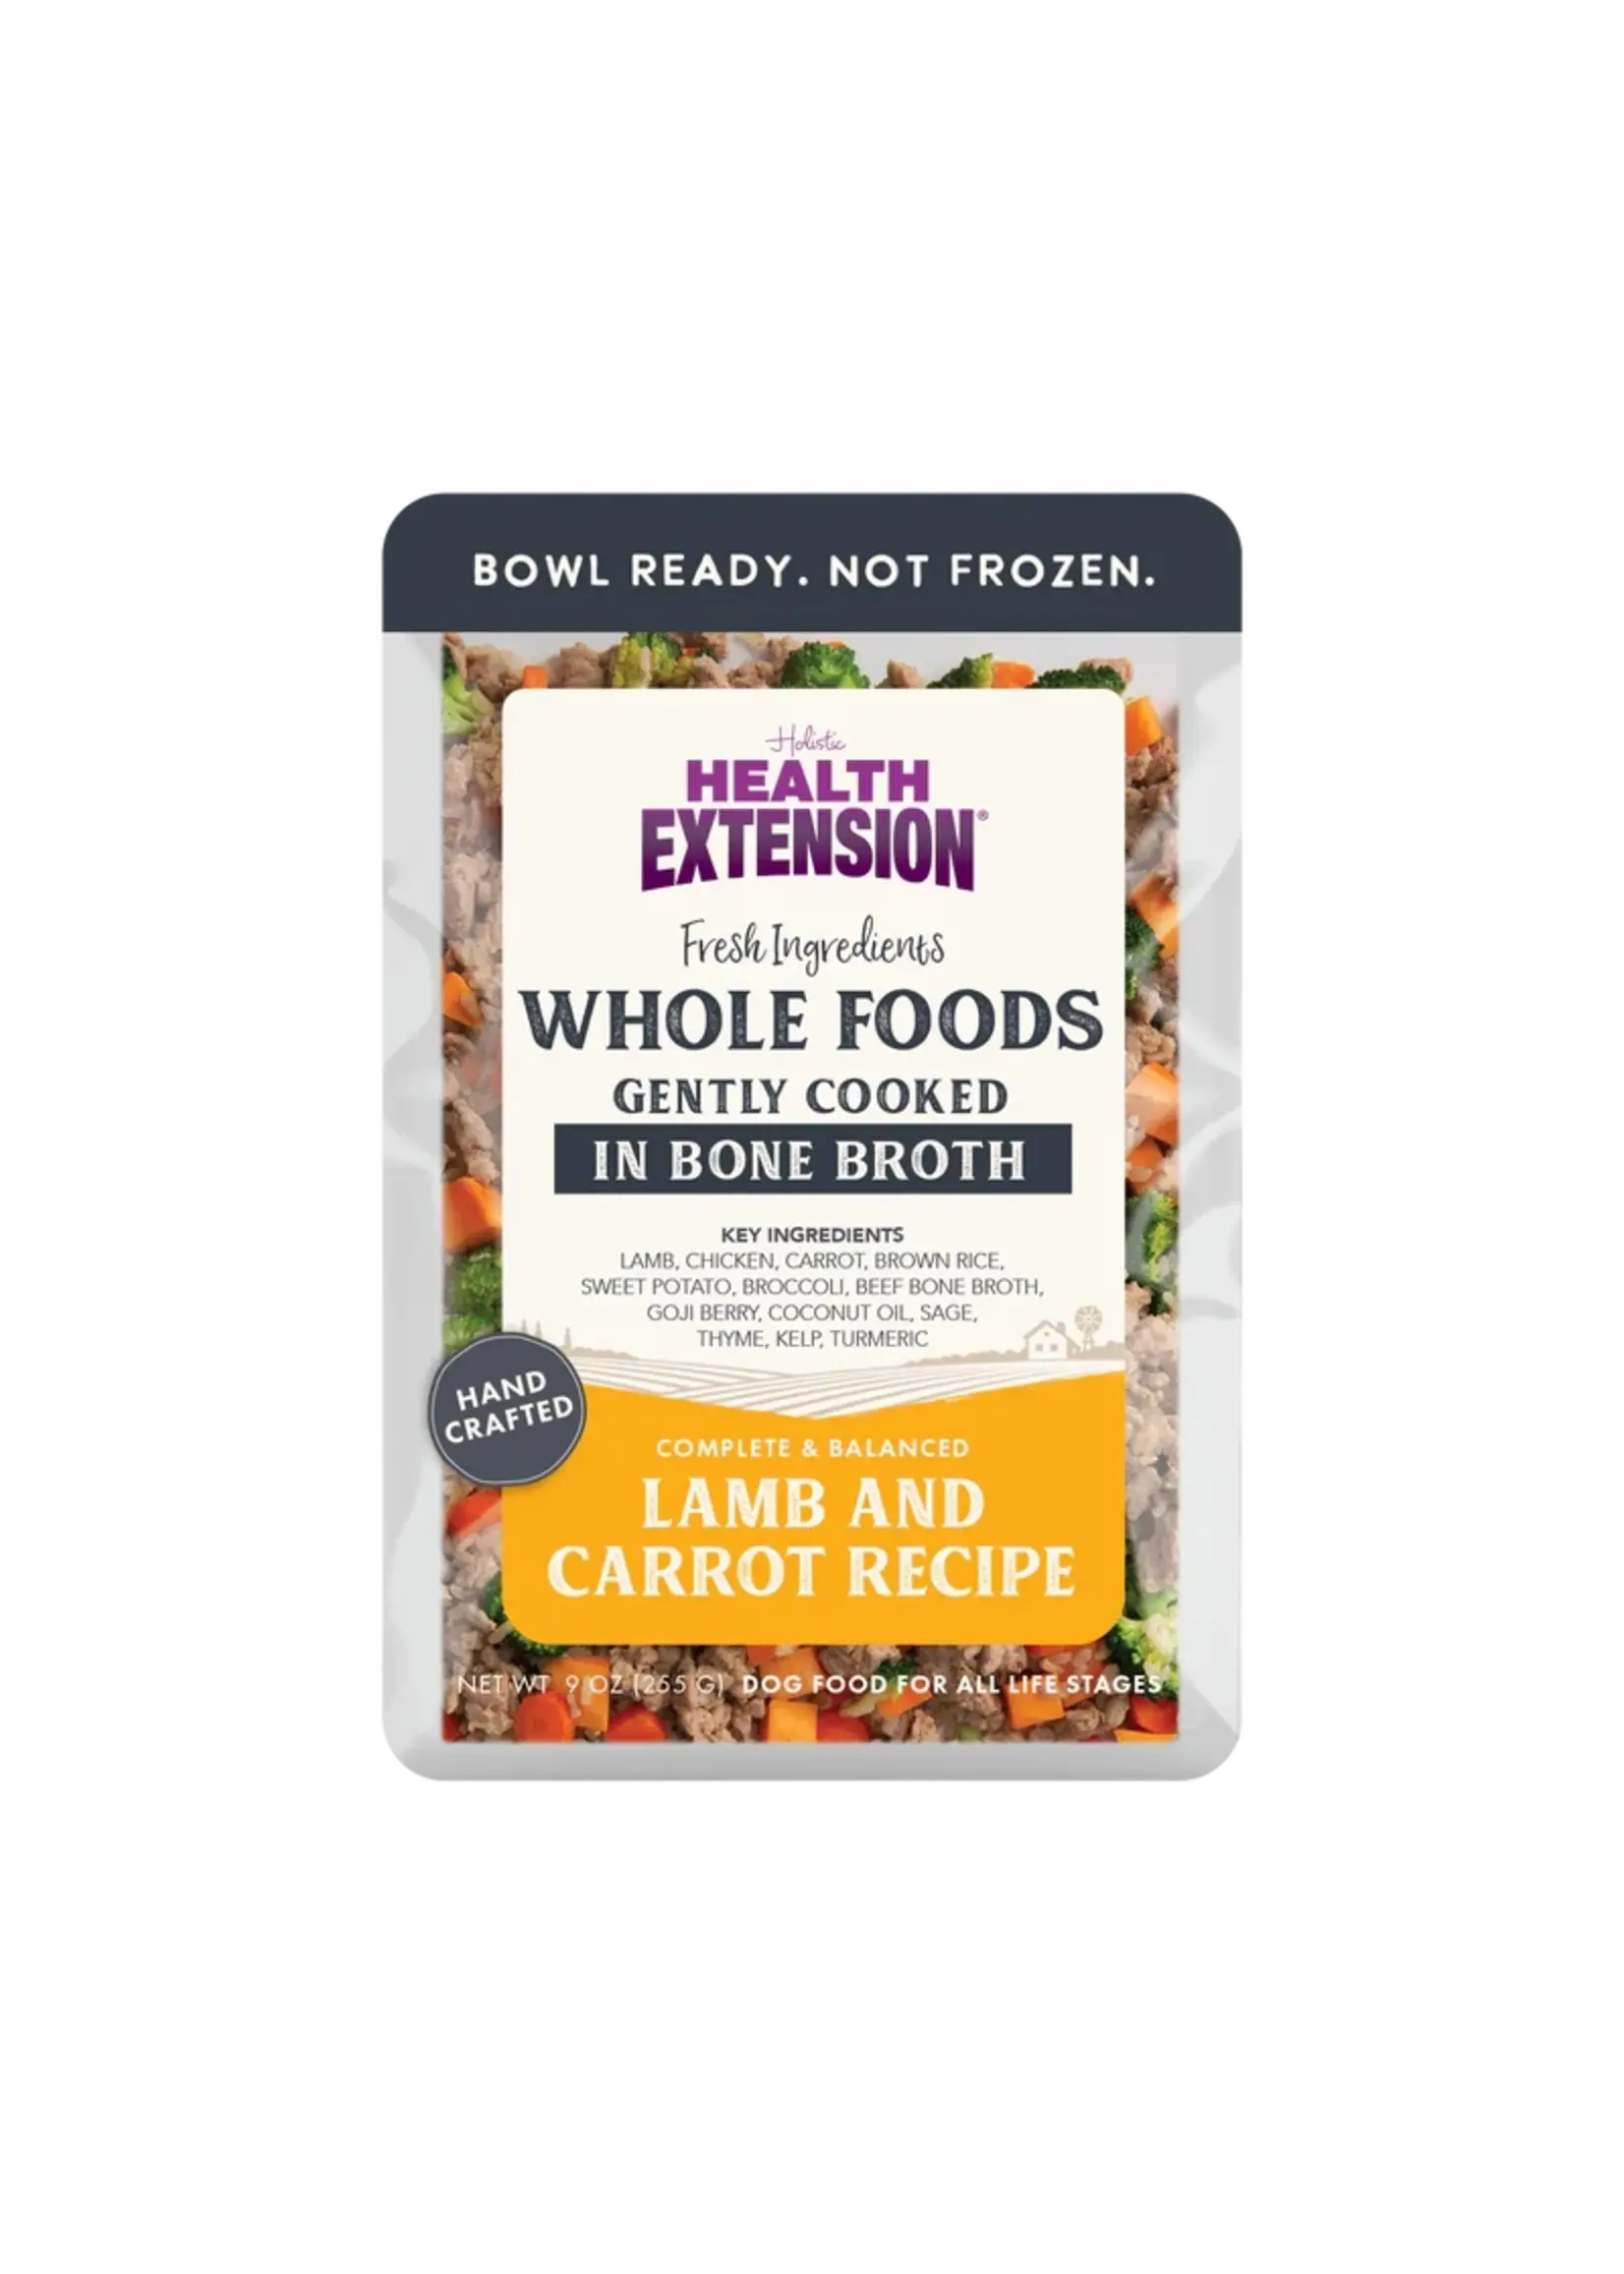 Holistic Health Extension Holistic Health Extension Gently Cooked Lamb & Carrot Recipe 9oz